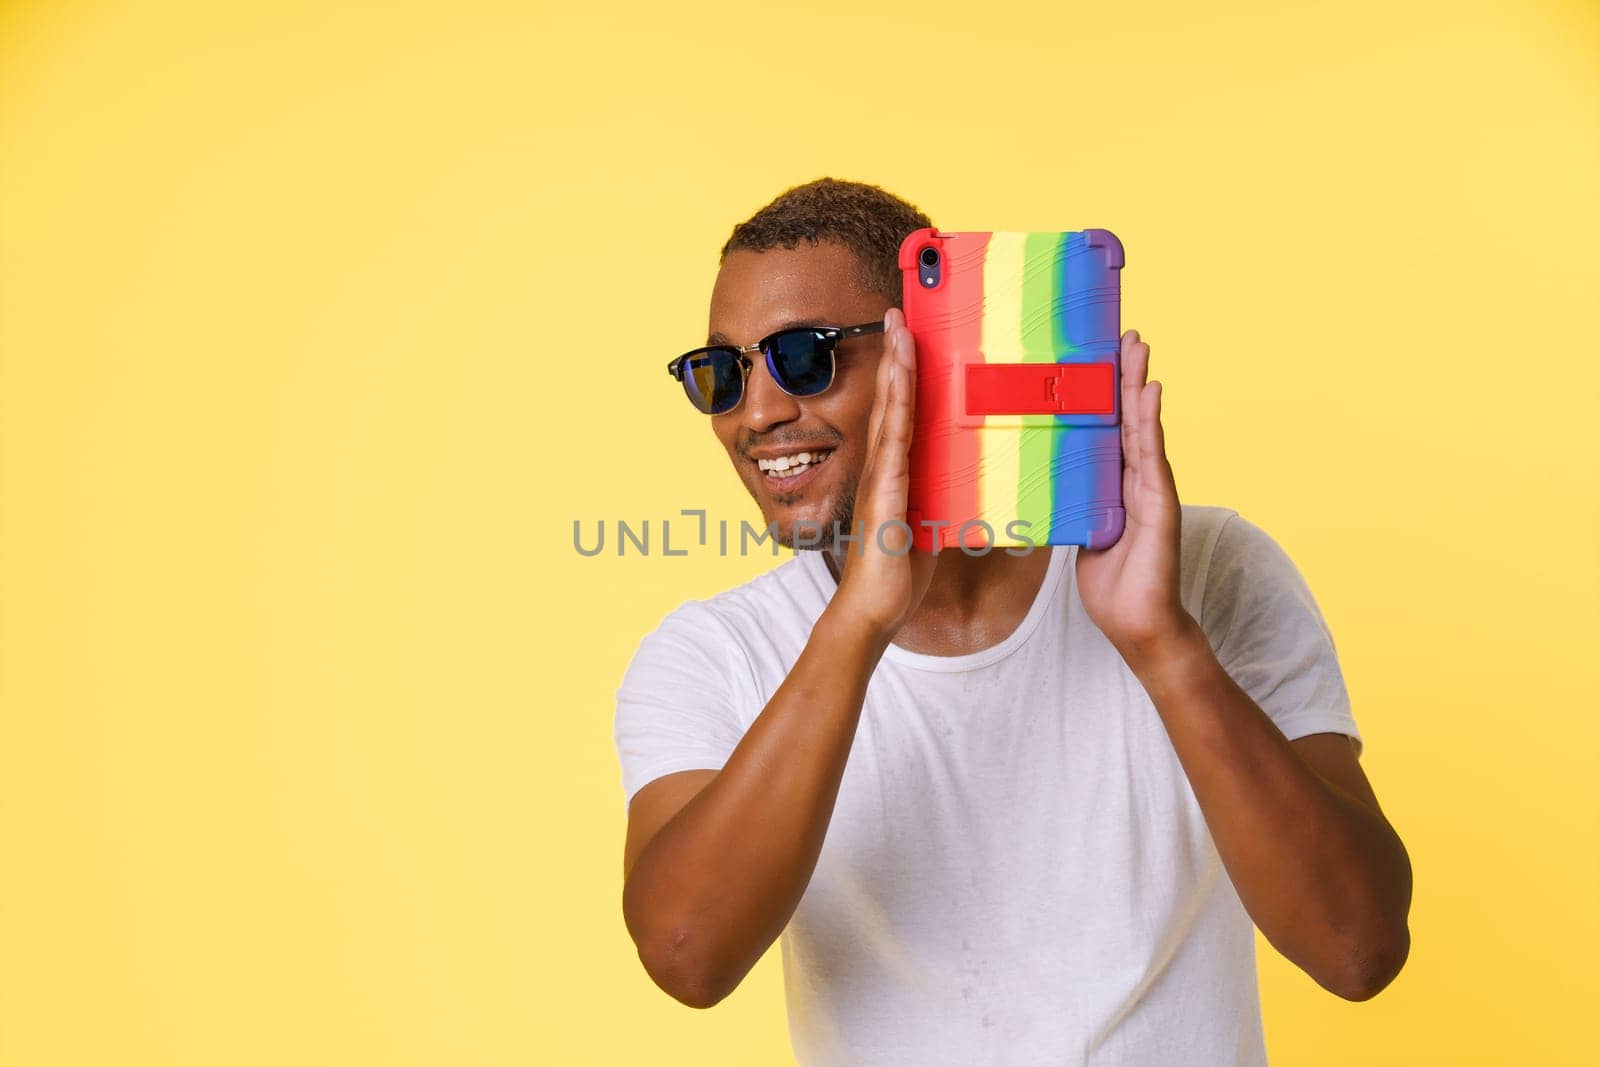 With smile on face, young African American man uses Tablet PC to share truth and come out as gay. Yellow background and ample copy space for LGBT community or concepts of bravery and self-expression. by LipikStockMedia